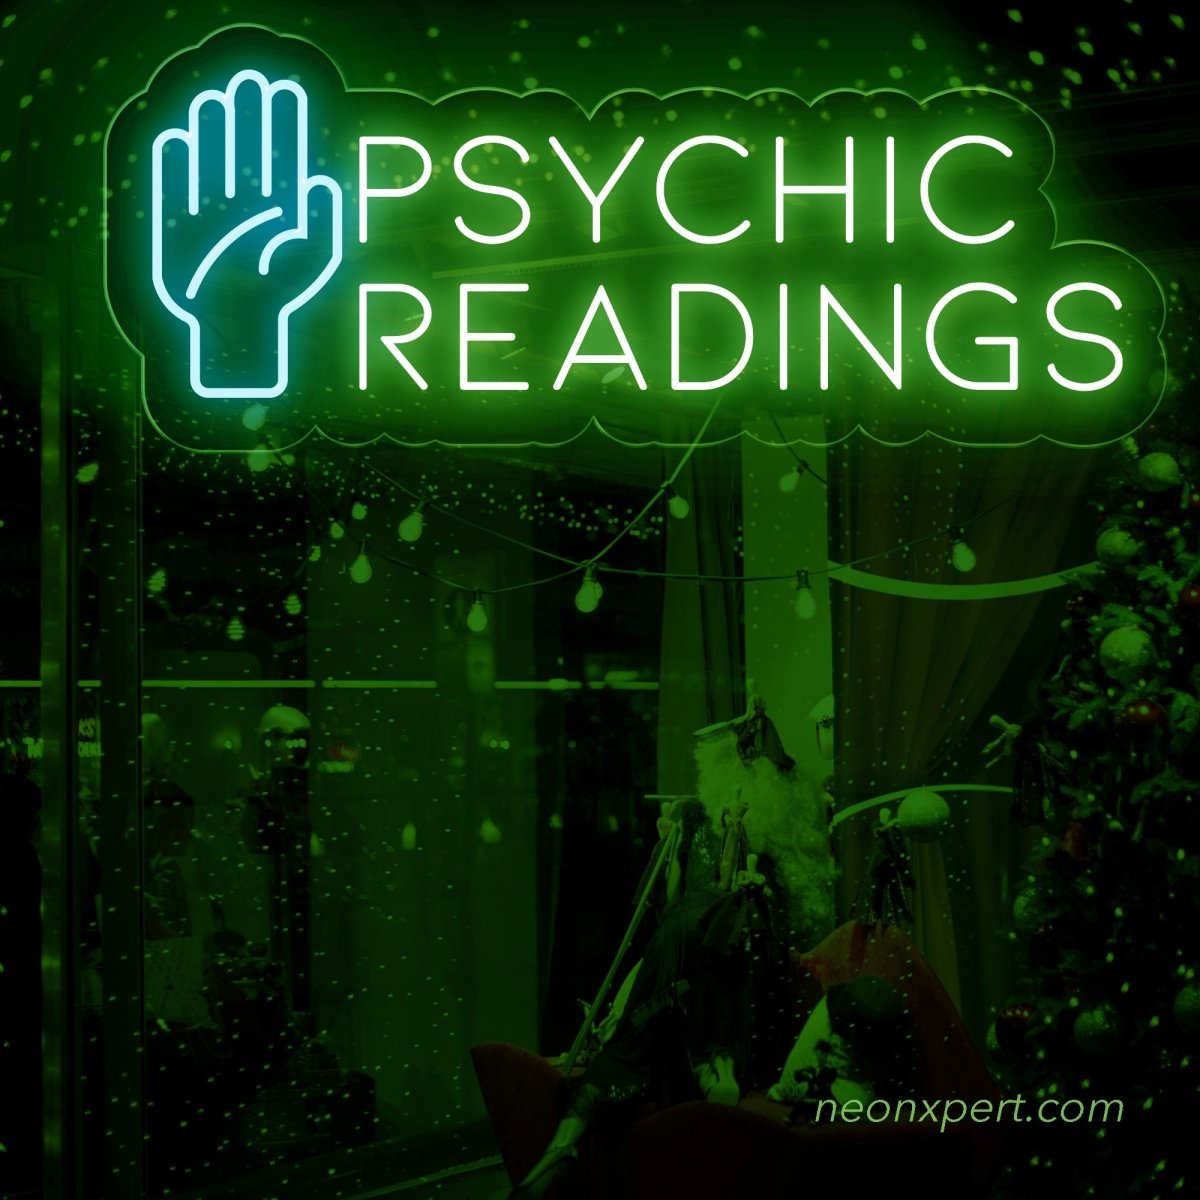 Psychic Readings LED Neon Sign - NeonXpert